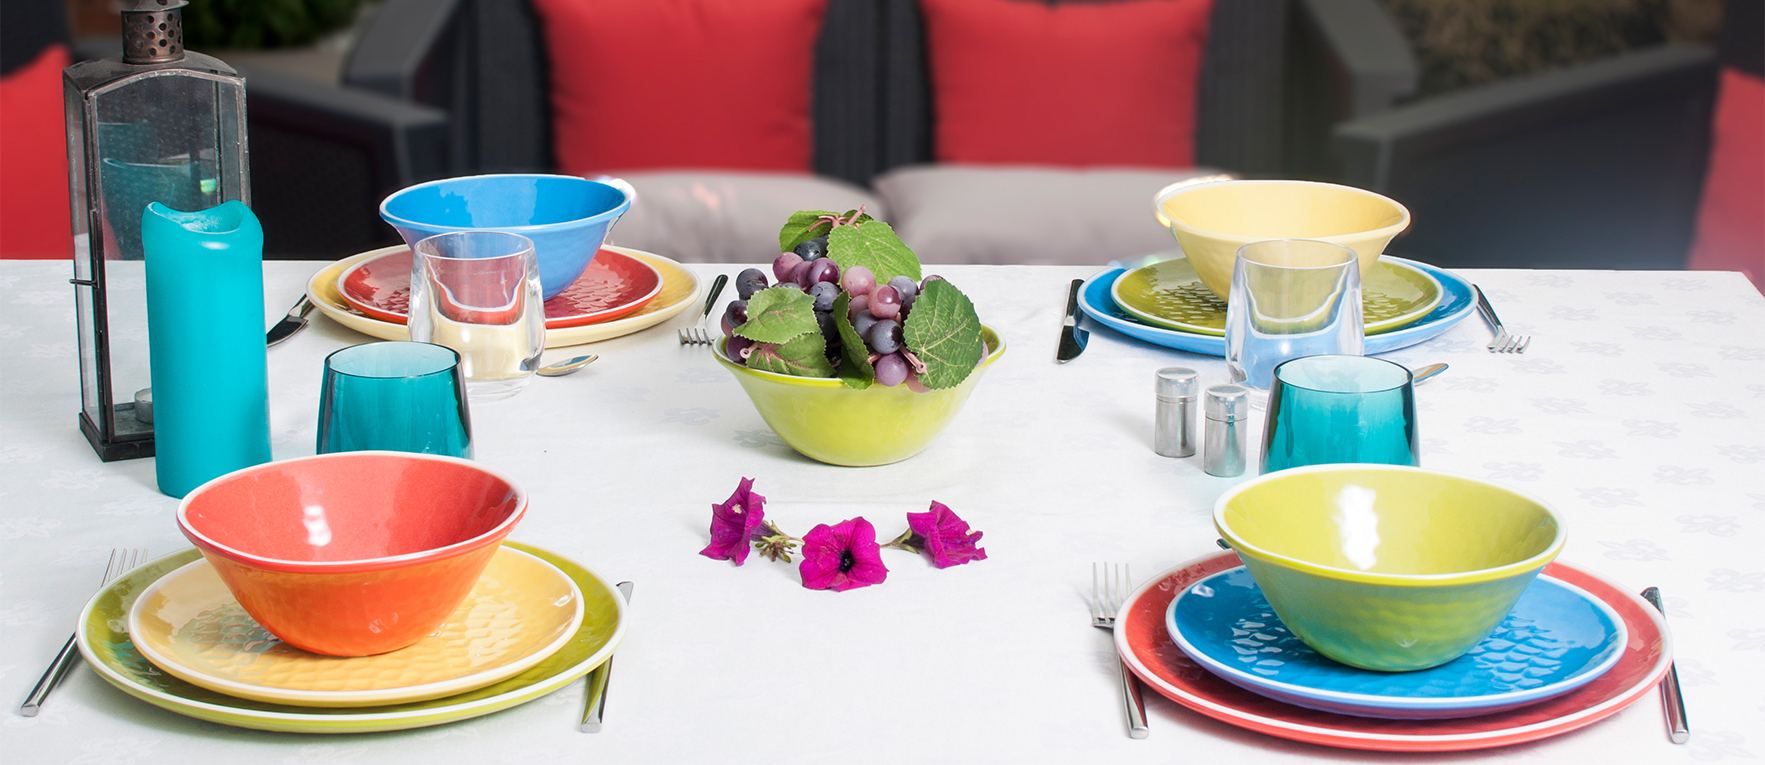 Collection of unbreakable crockery in colored melamine